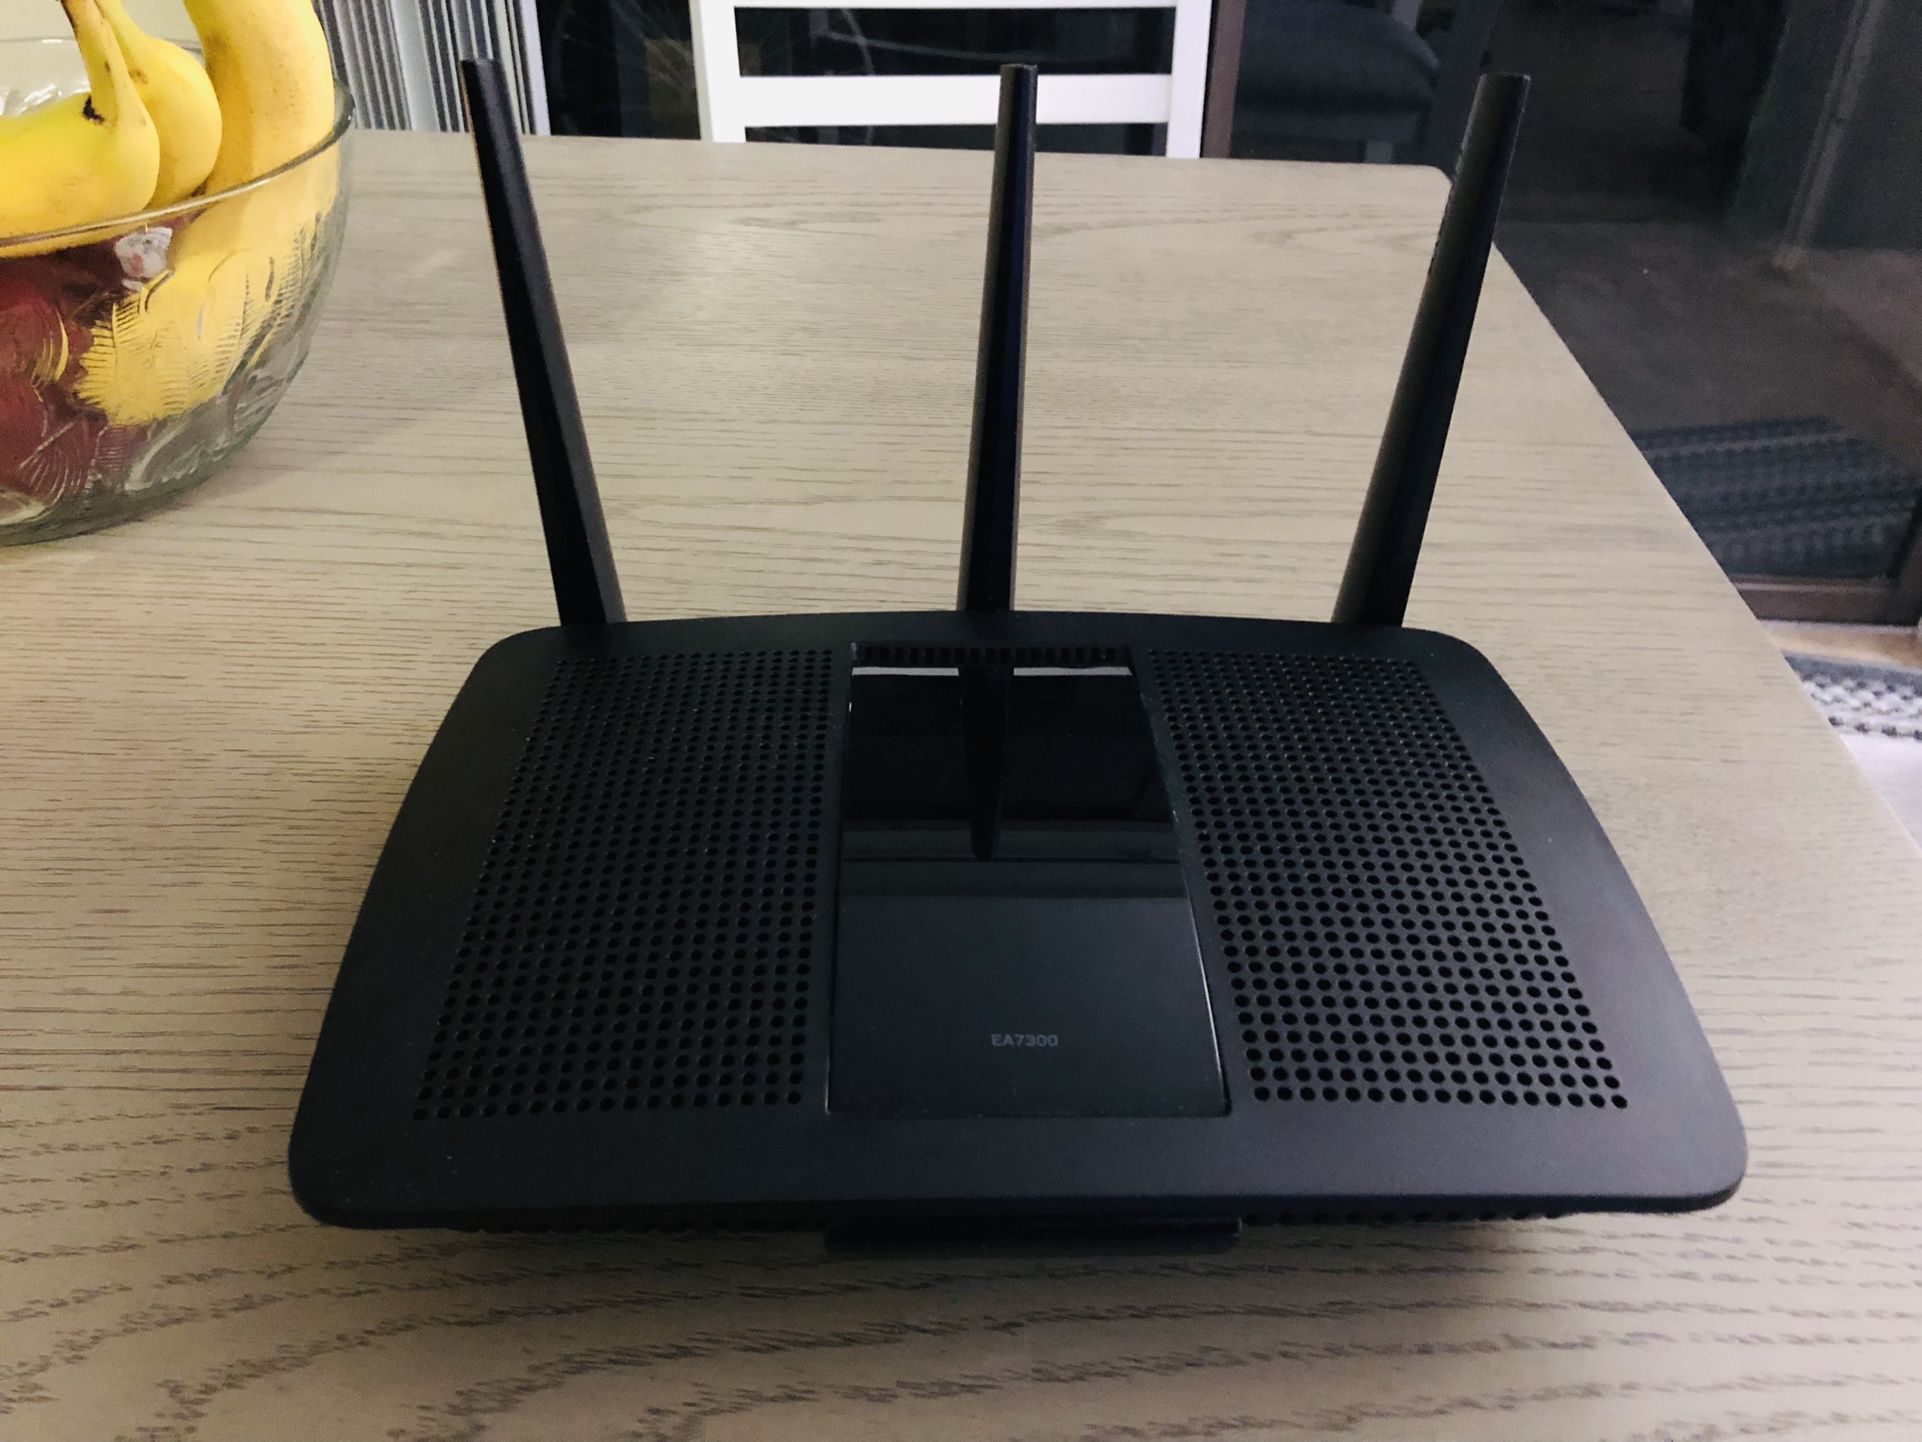 Dual Band Linksys EA7300 Gigabit WiFi Router For Sale!